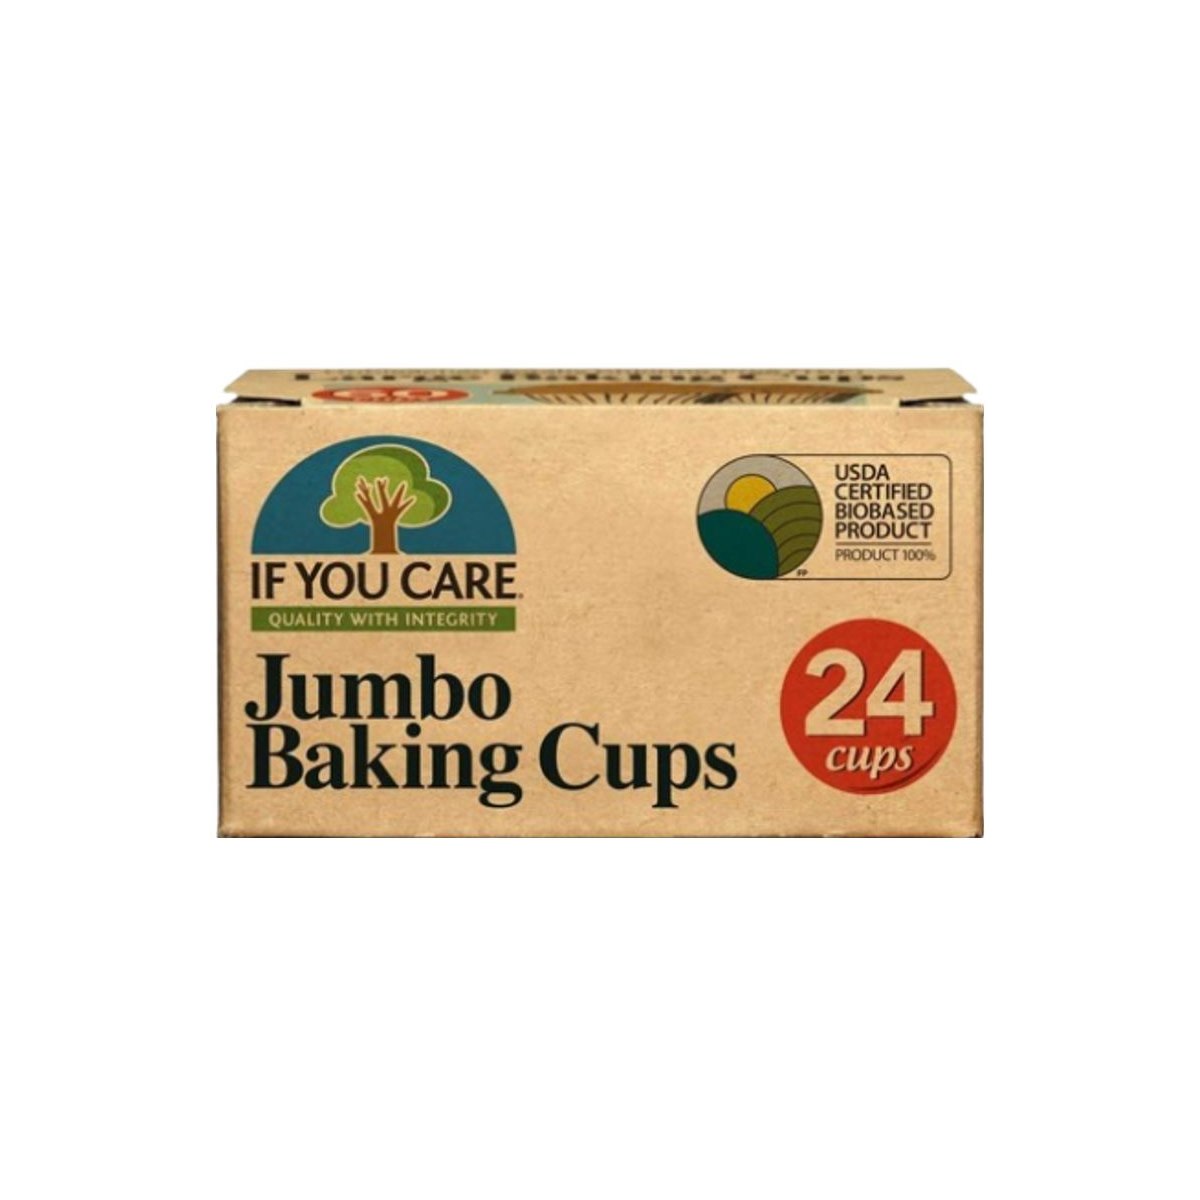 If You Care Jumbo Baking Cups Pack of 24